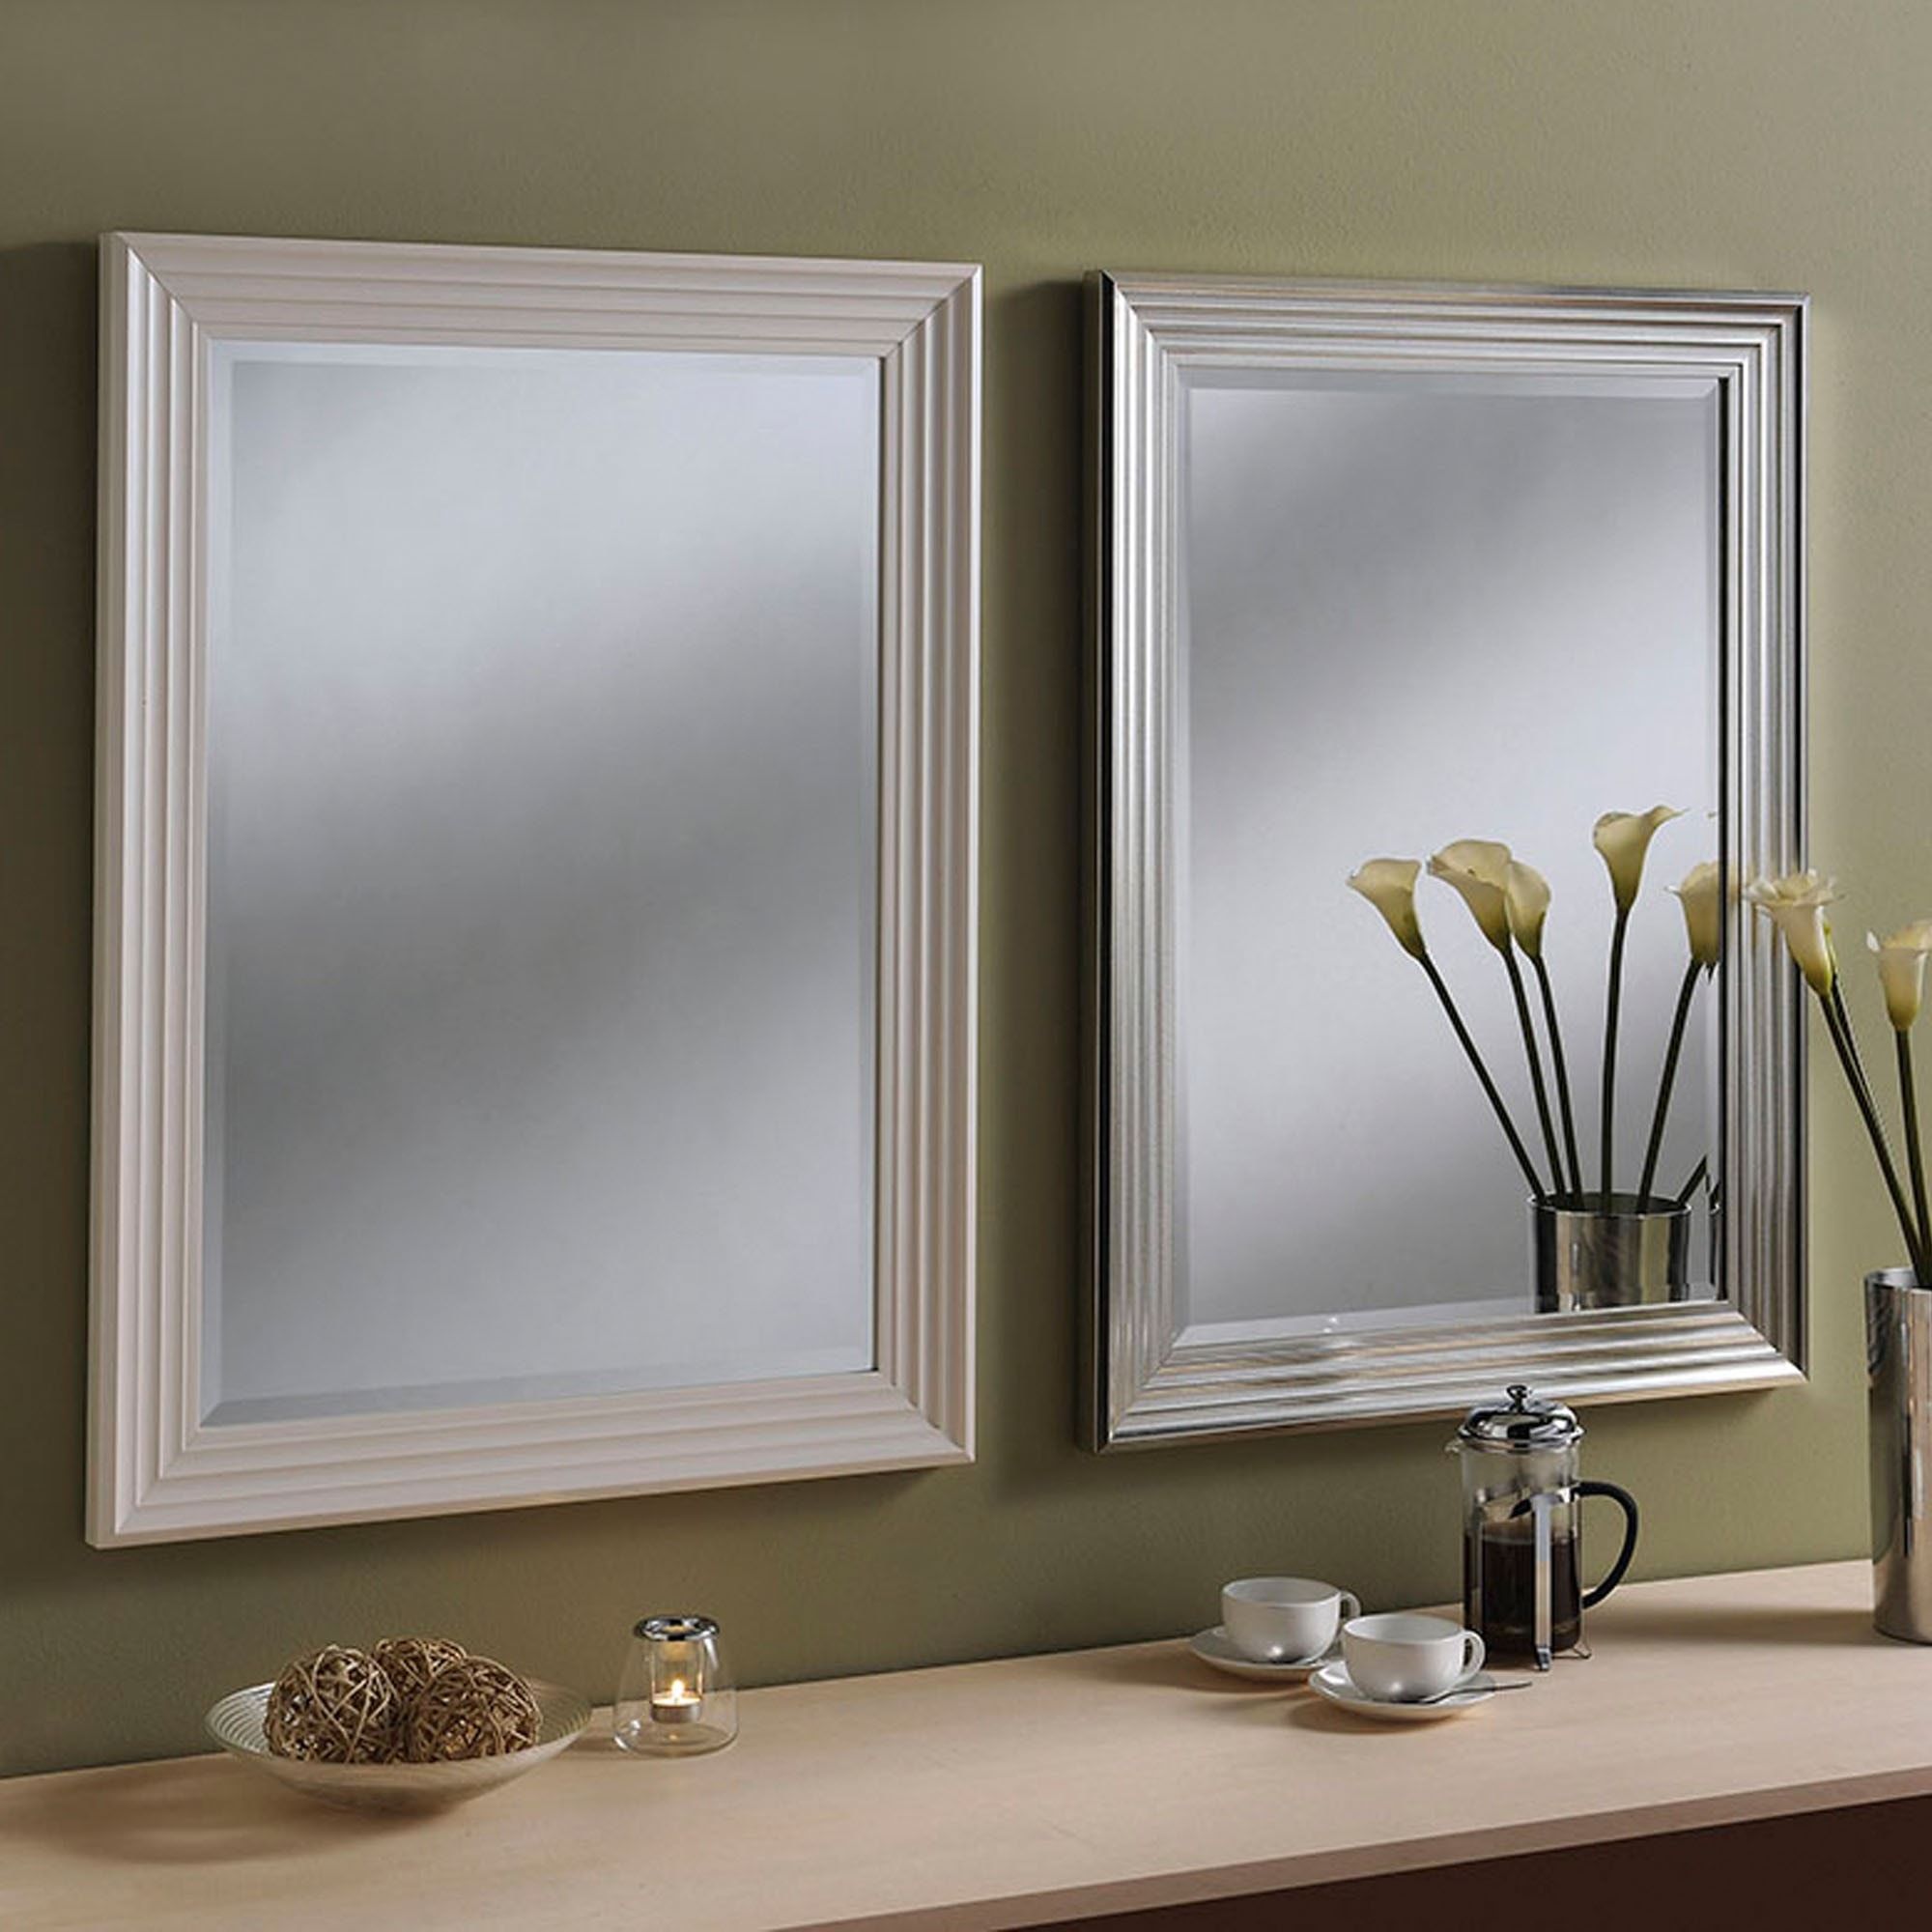 Rectangular Decorative Mirror | Decorative Mirrors With Lugo Rectangle Accent Mirrors (View 15 of 15)